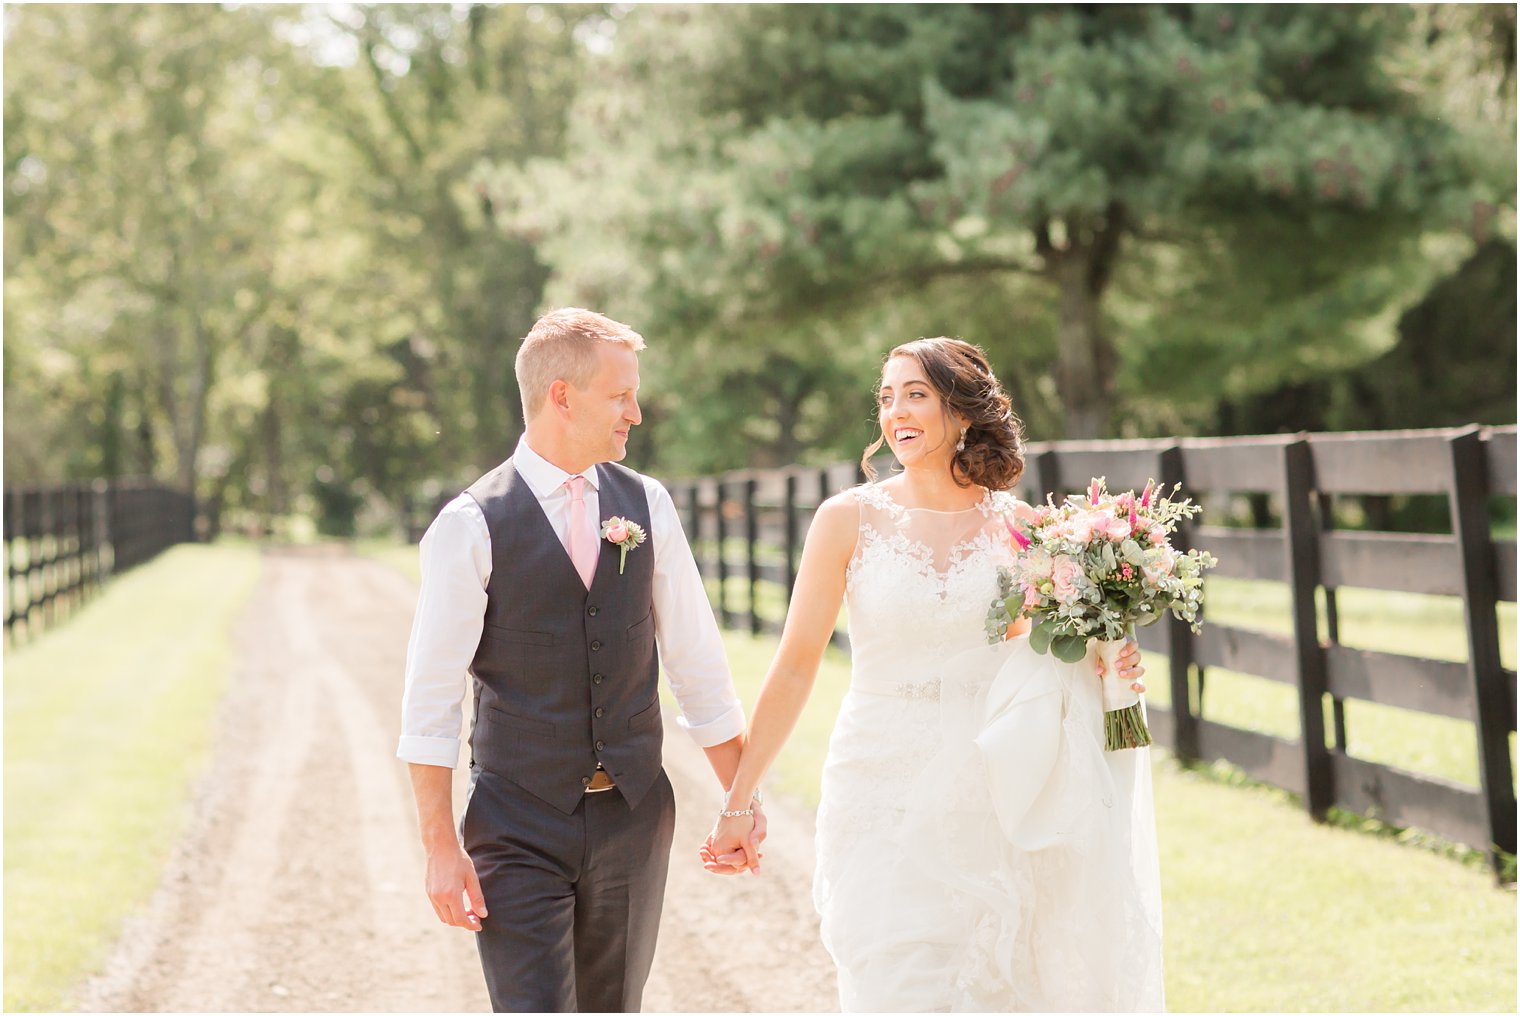 Candid photo of bride and groom at Stone Rows Farm